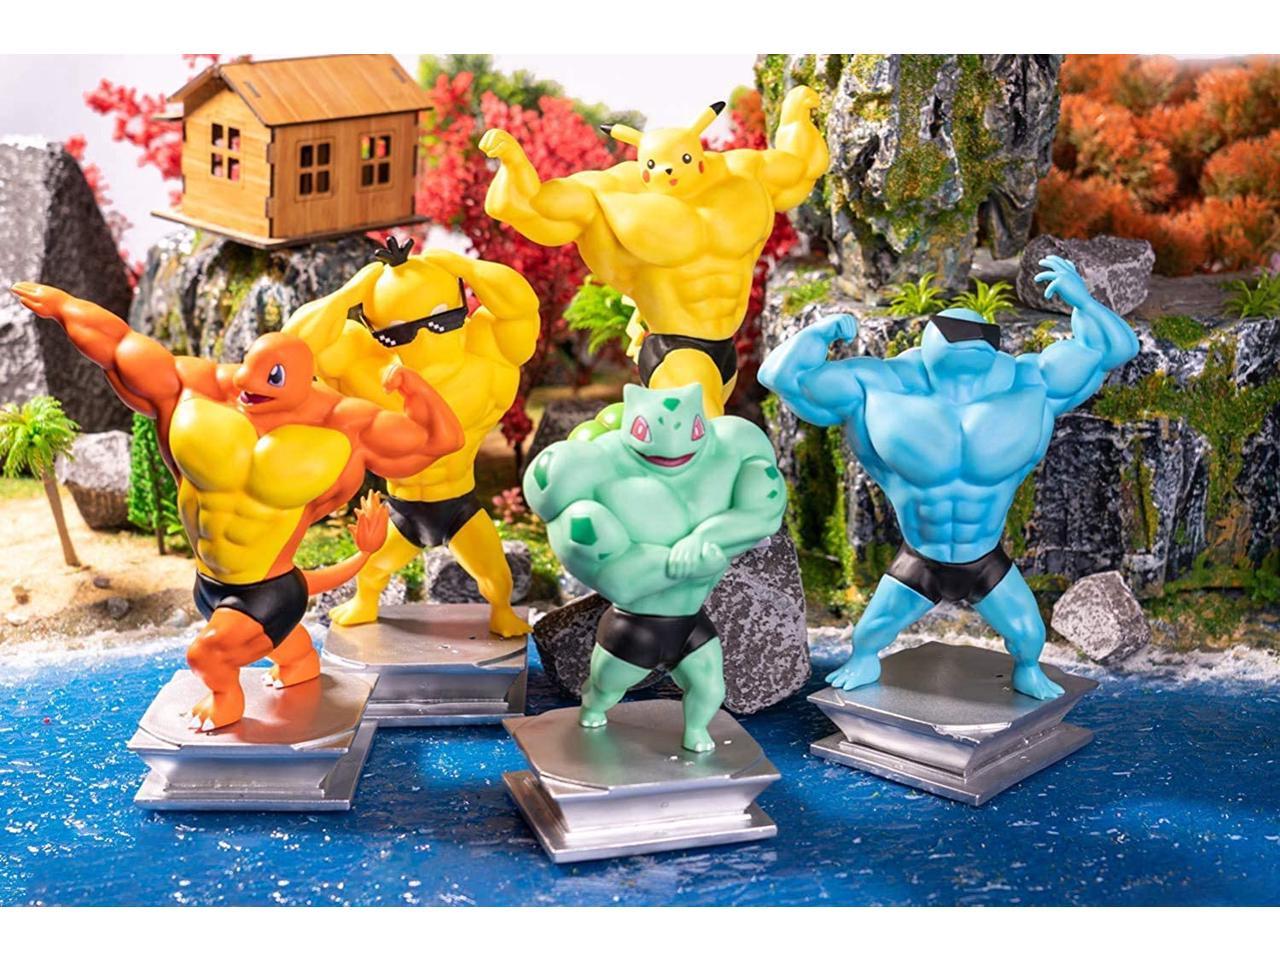 yelusaleng Action Figure Bodybuilding Series Anime Statue Figurine Collection Gifts PVC Model Toys Birthday Gifts 7 Color : Bulbasaur 